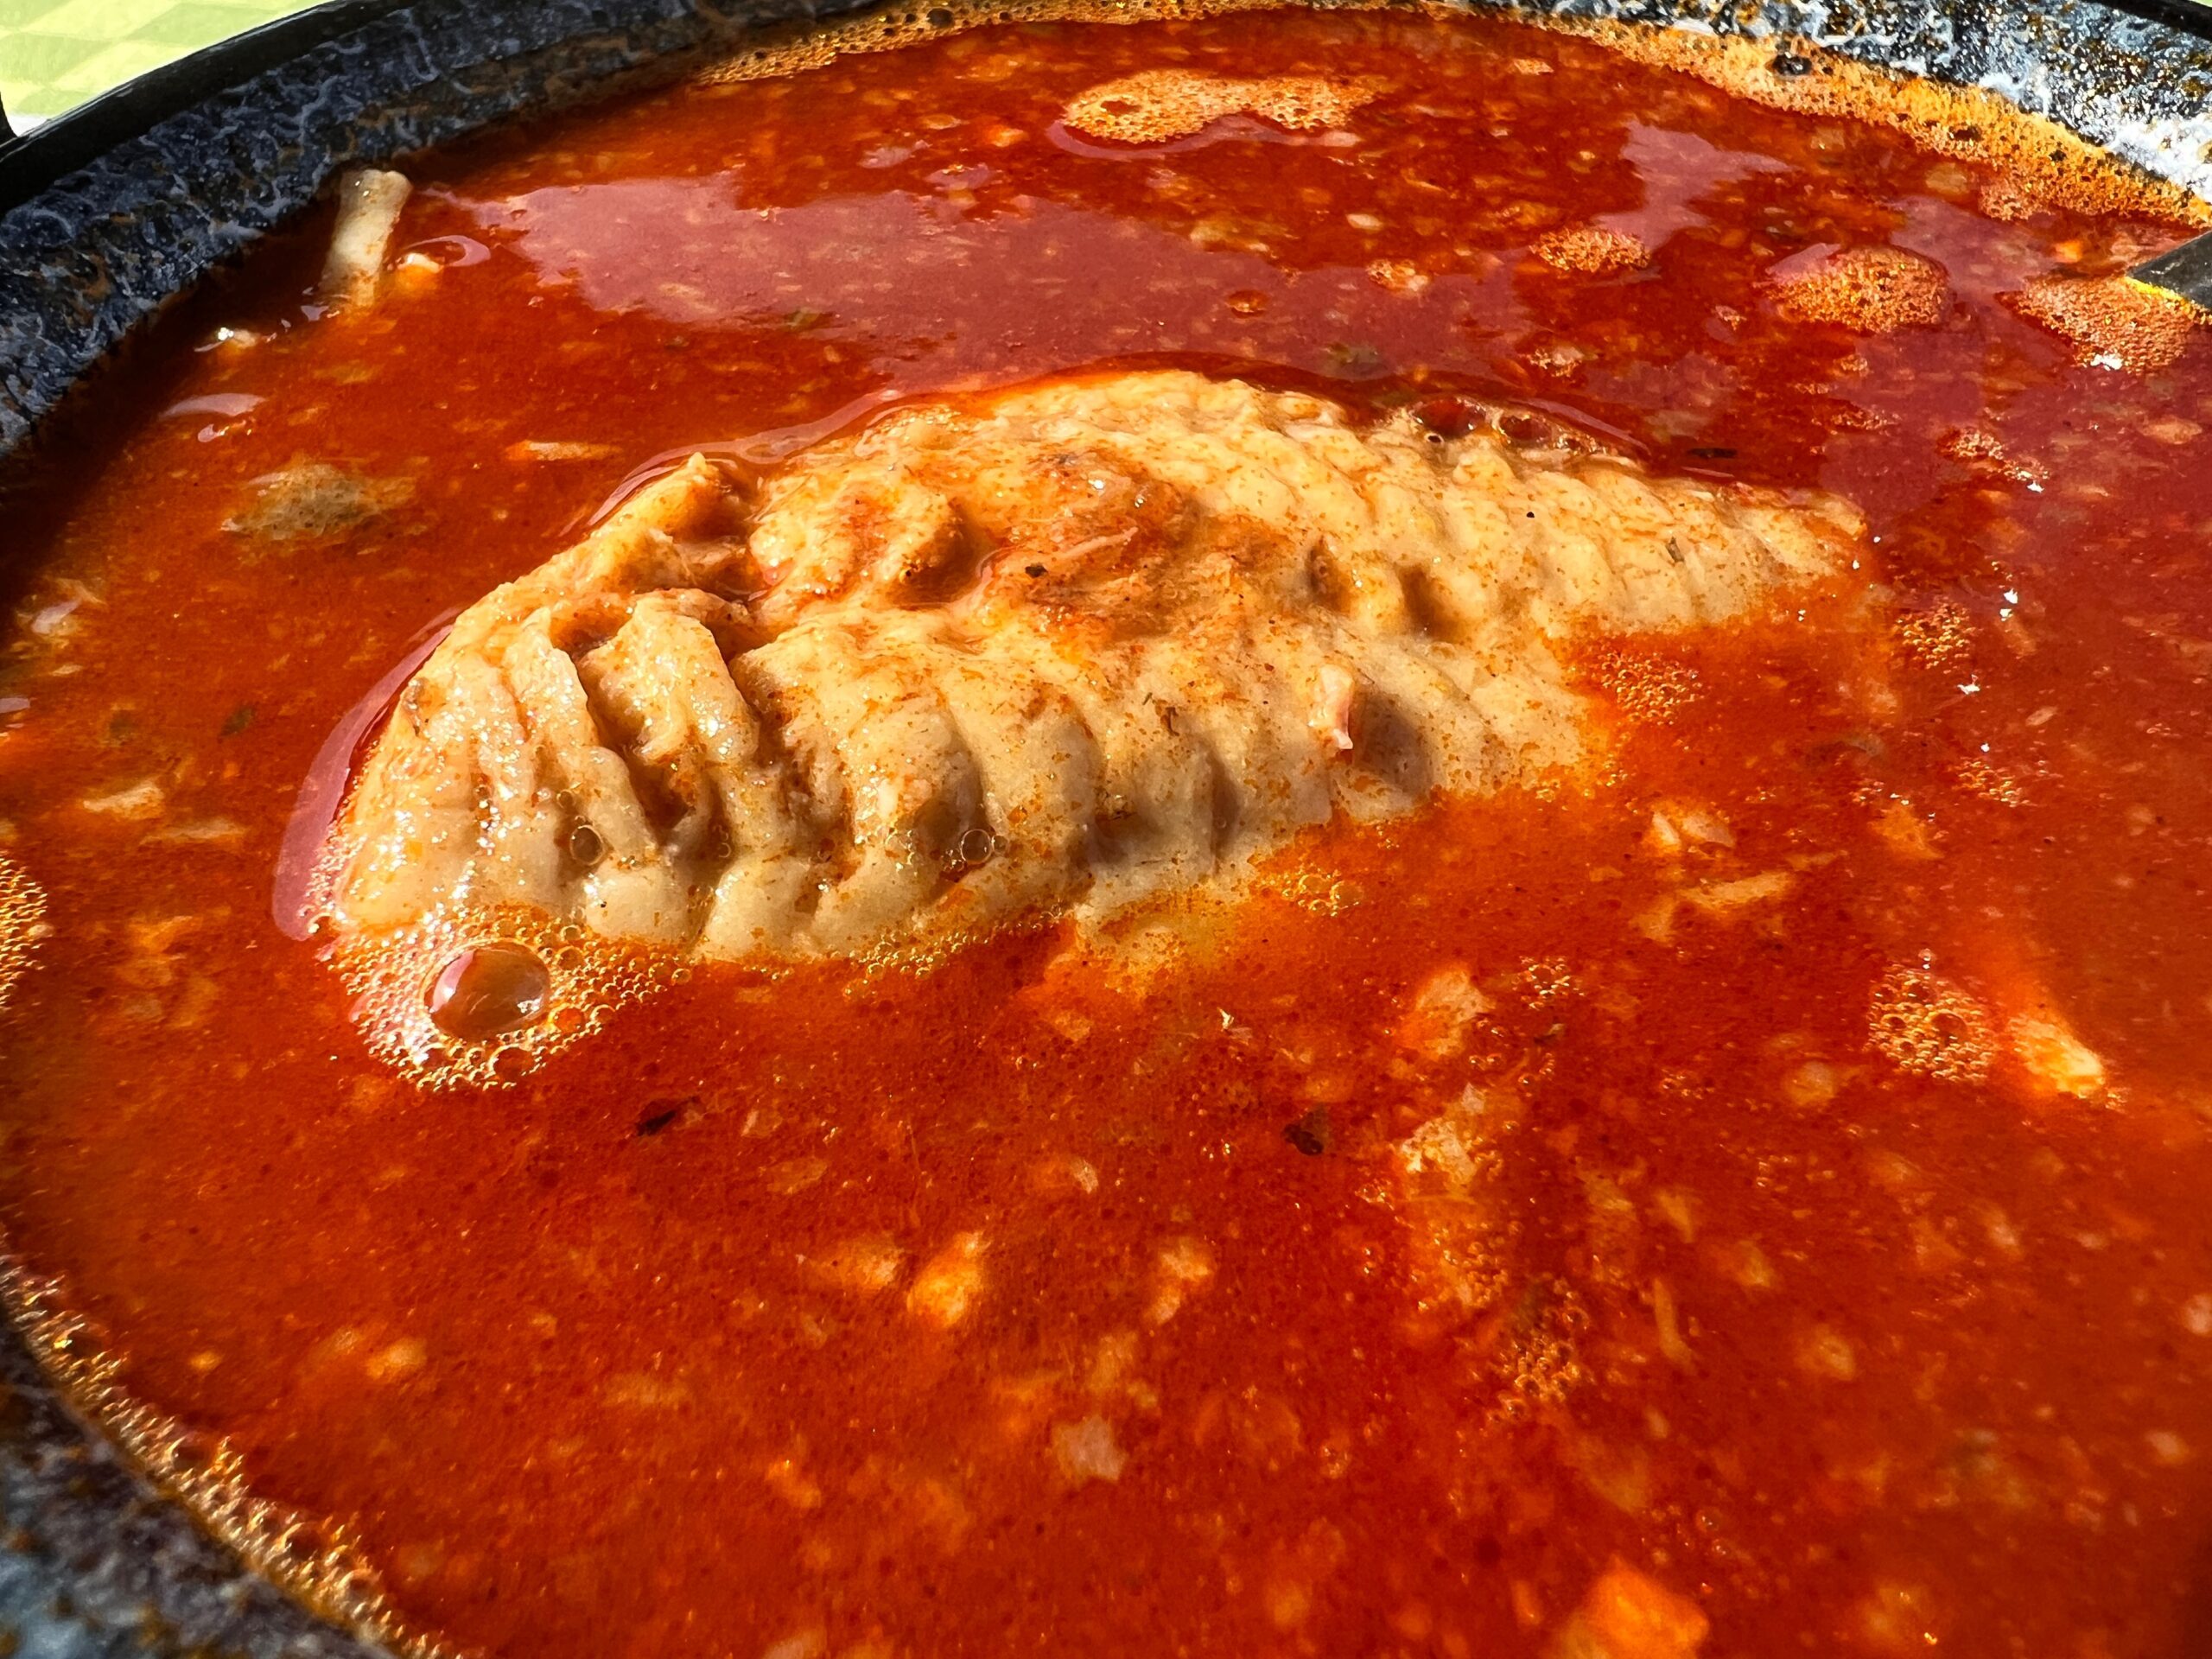 Fish broth soup with a tomato and paprika in Kolosca, Hungary